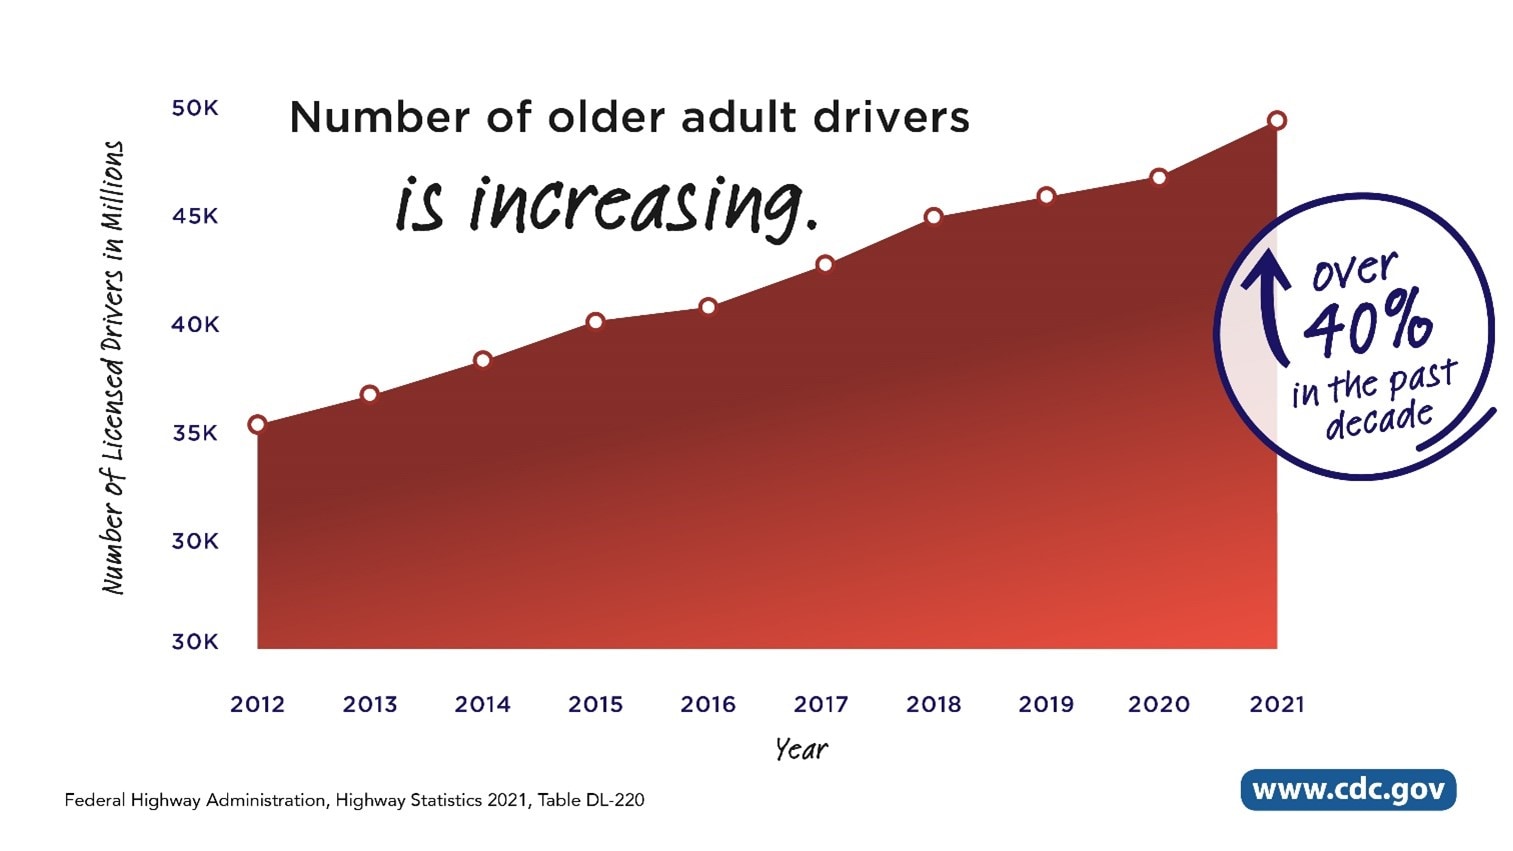 Graph: Number of older adult drivers is increasing. Over 40% in the past decade.